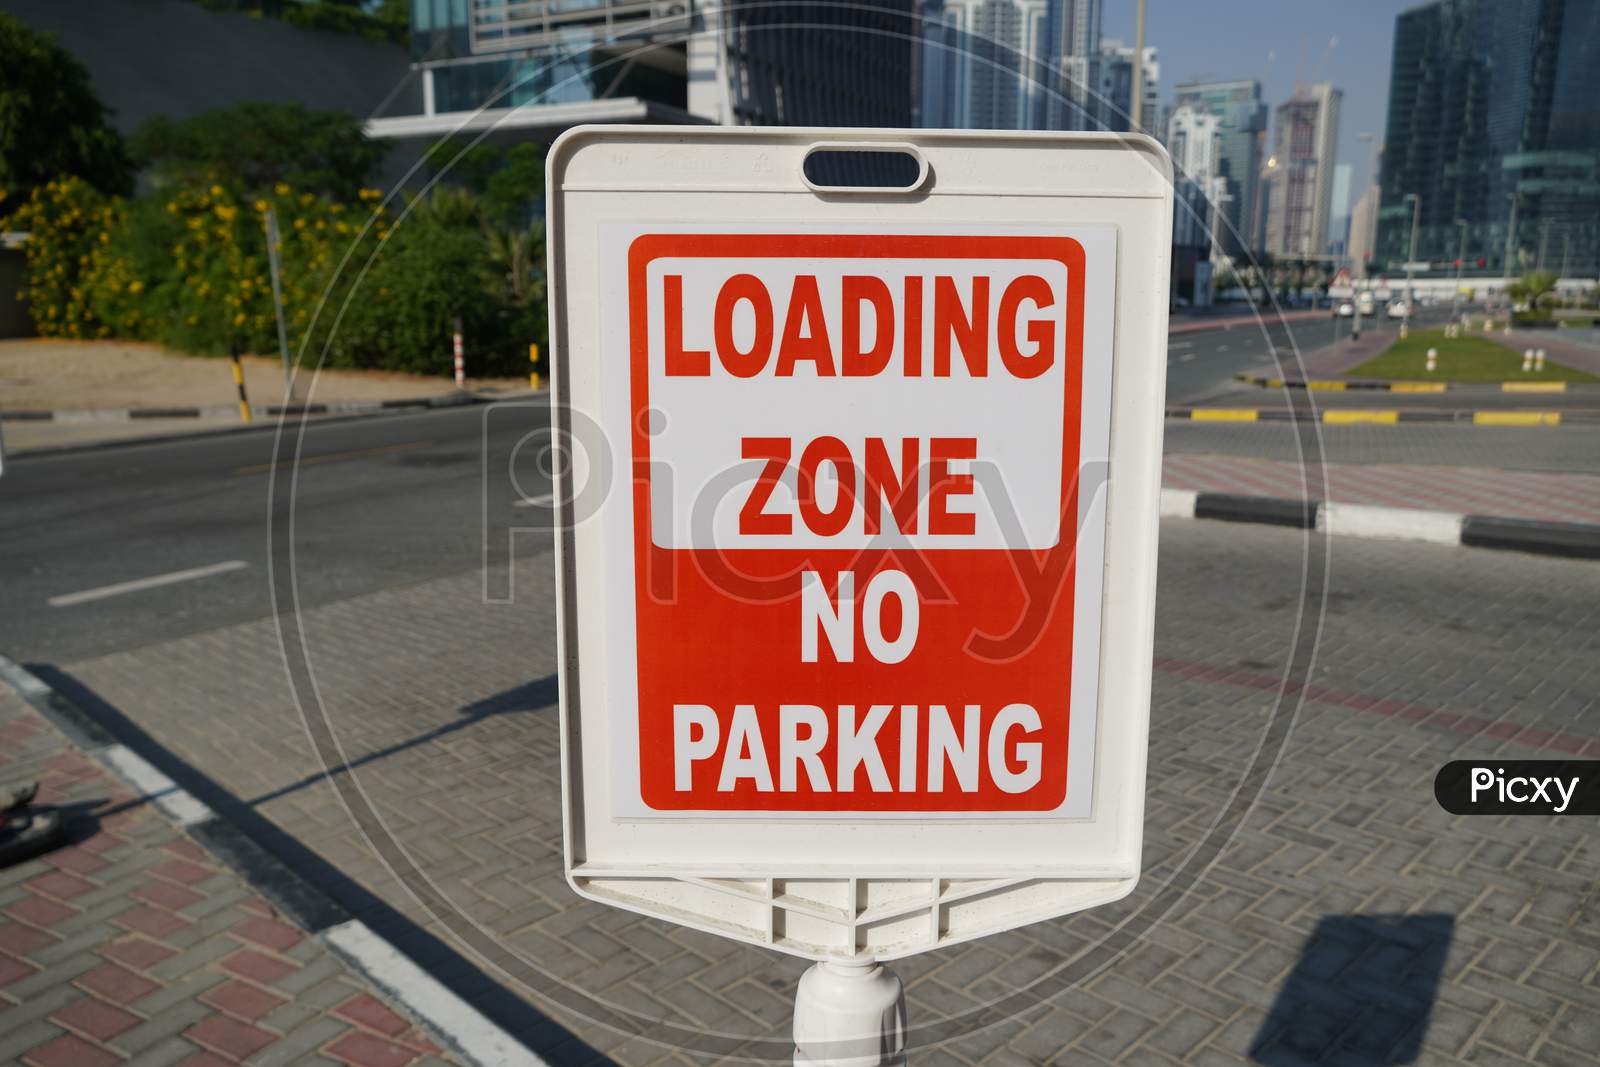 Dubai Uae December 2019 Red And White Sign For No Parking In The Loading Zone Outside A Building. Residential And Commercial Area With No Parking, Loading Zone Sign.